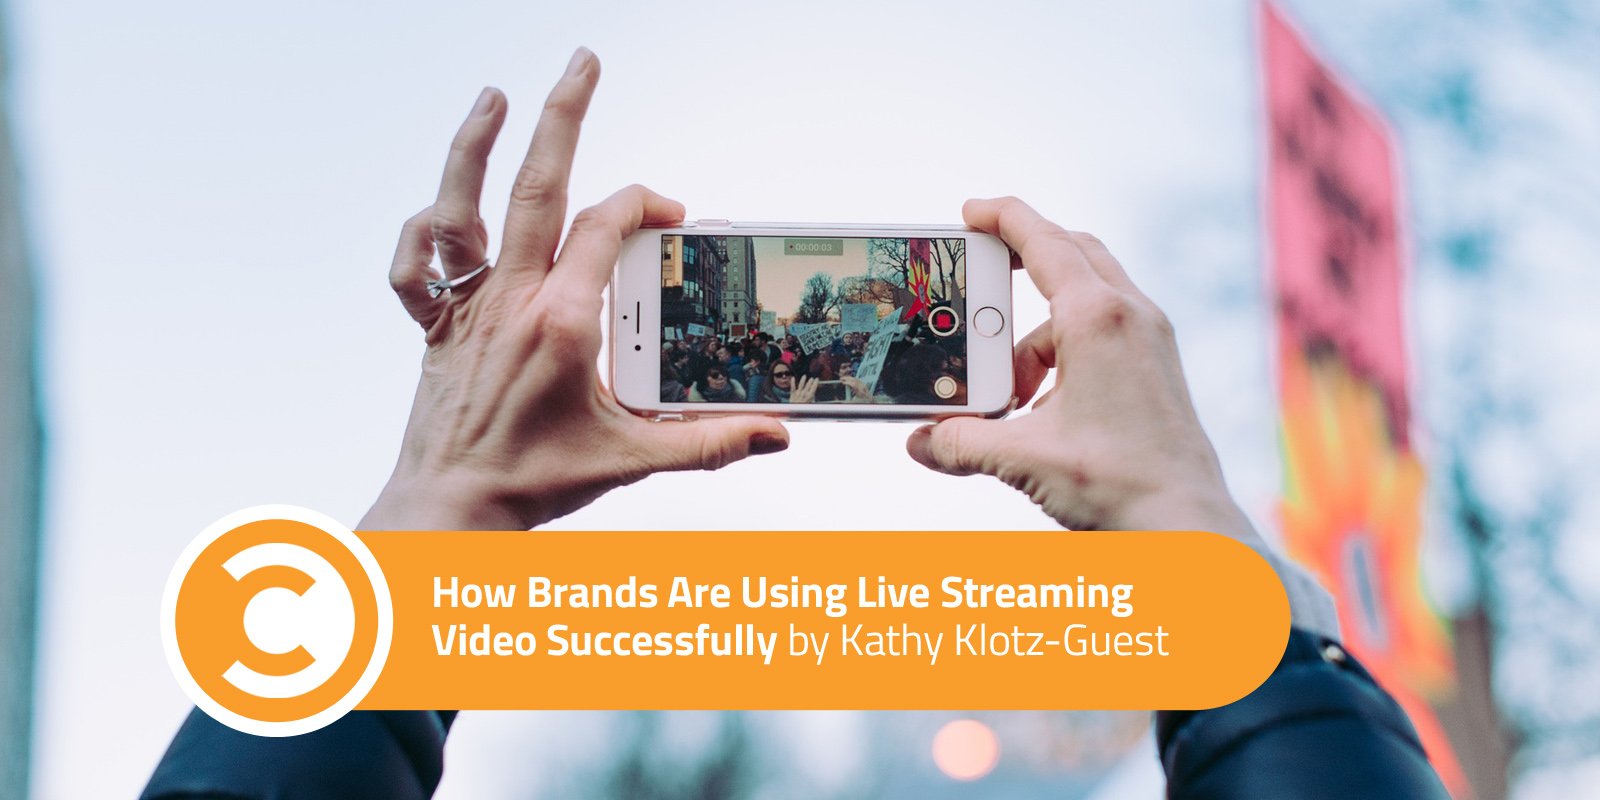 How Brands Are Using Live Streaming Video Successfully